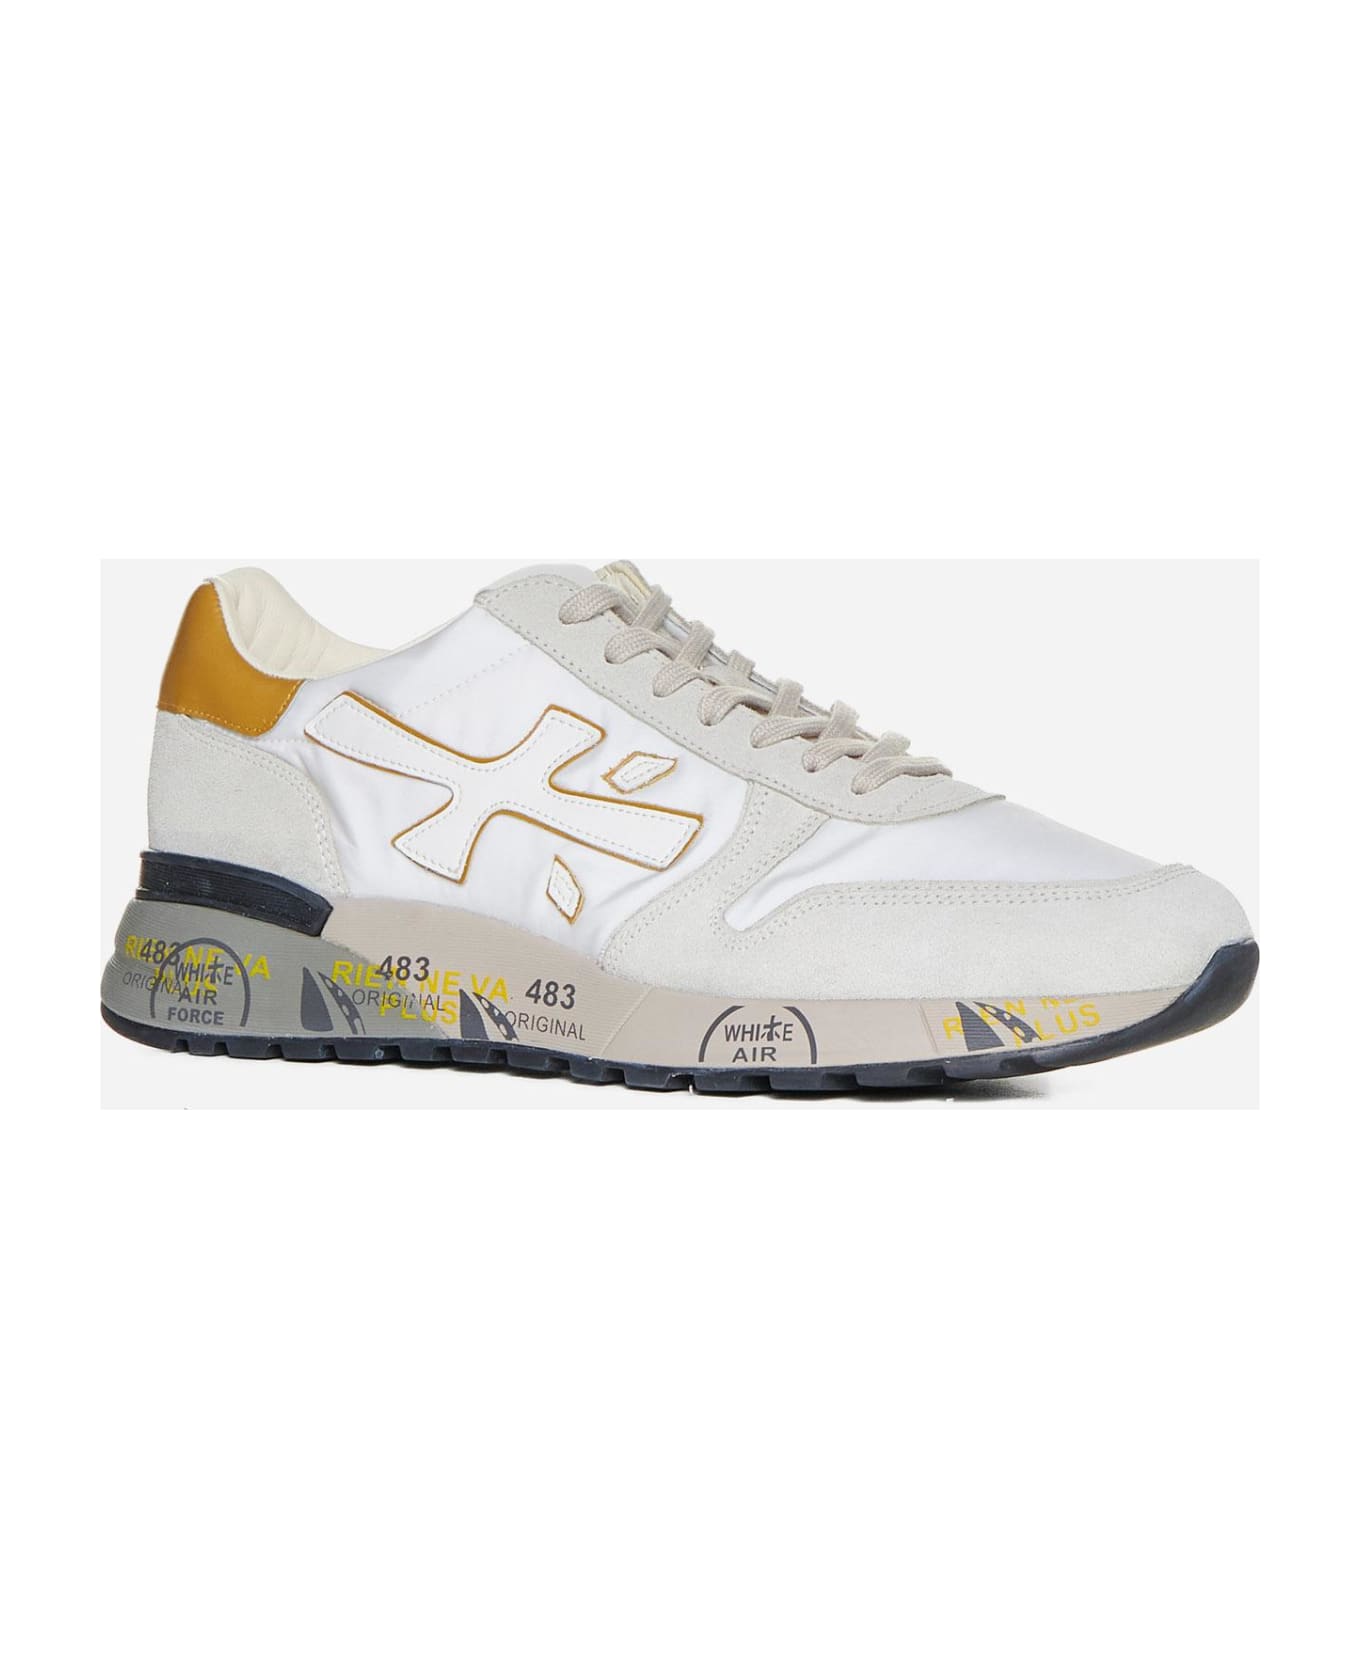 Premiata Mick Suede, Nylon And Leather Sneakers